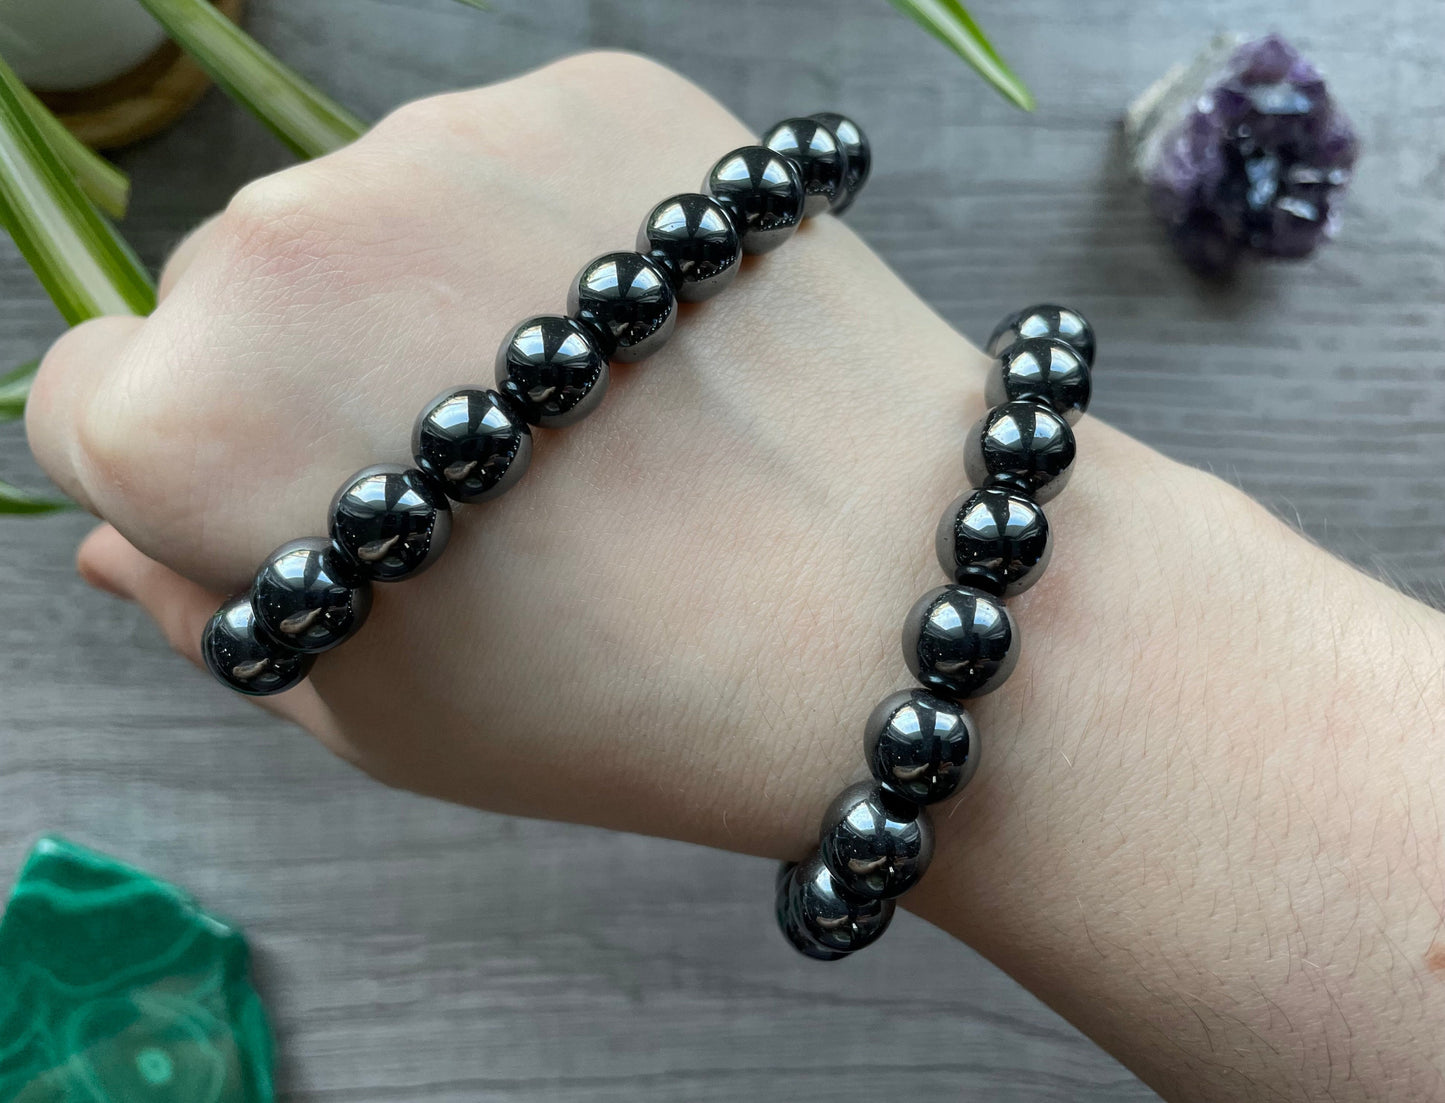 Pictured is a hematite bead bracelet.